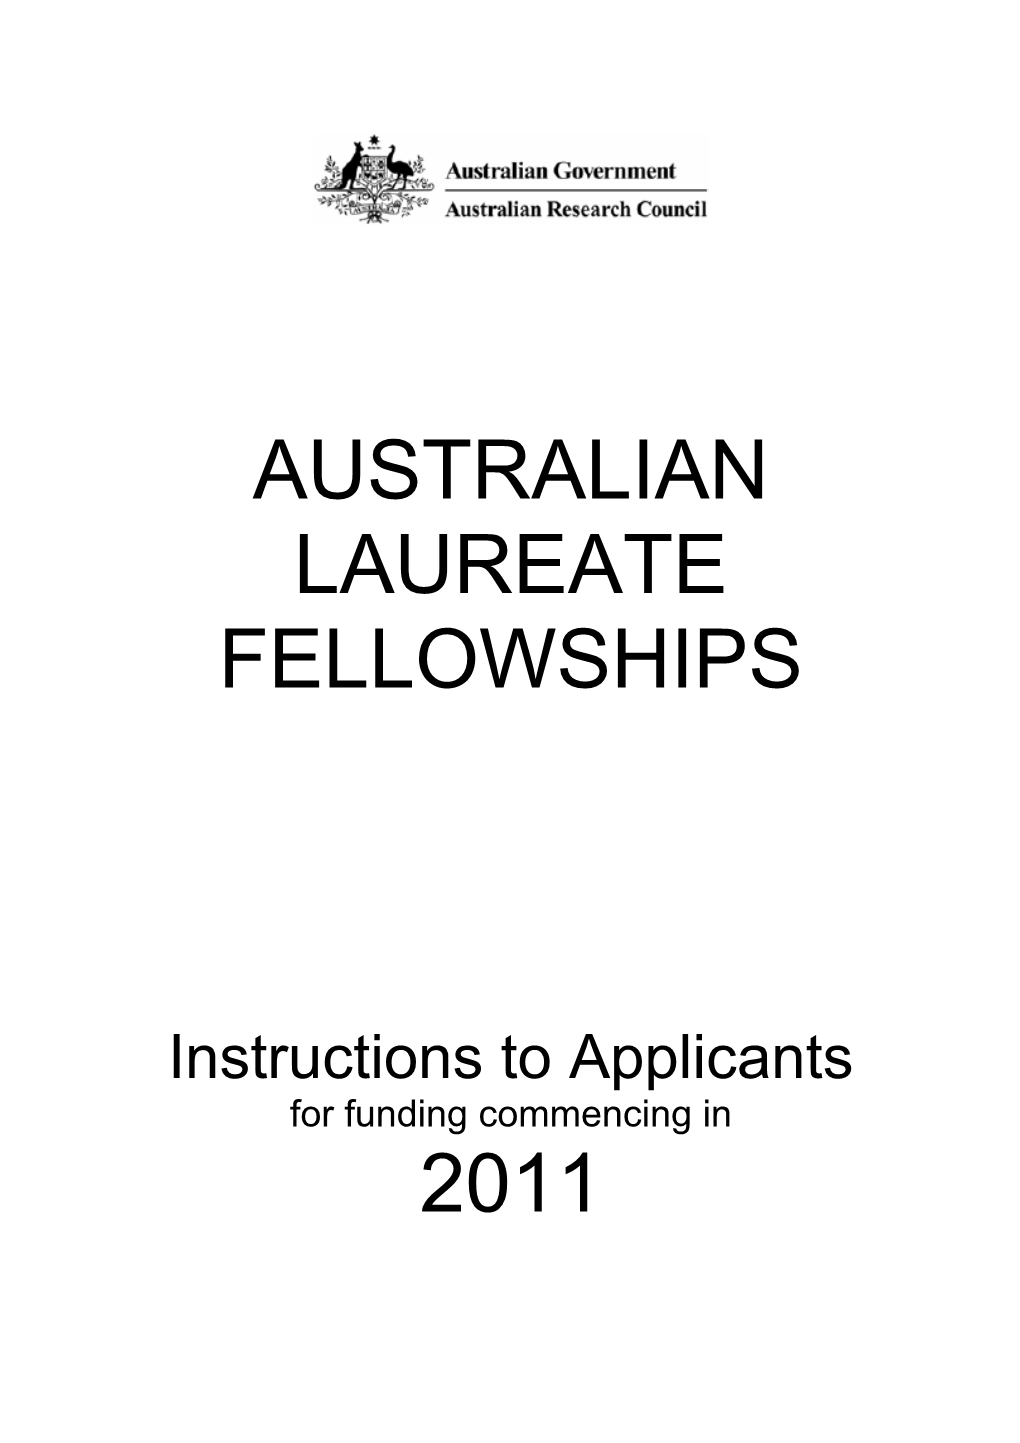 Australian Laureate Fellowships Instructions to Applicants for Funding Commencing in 2011